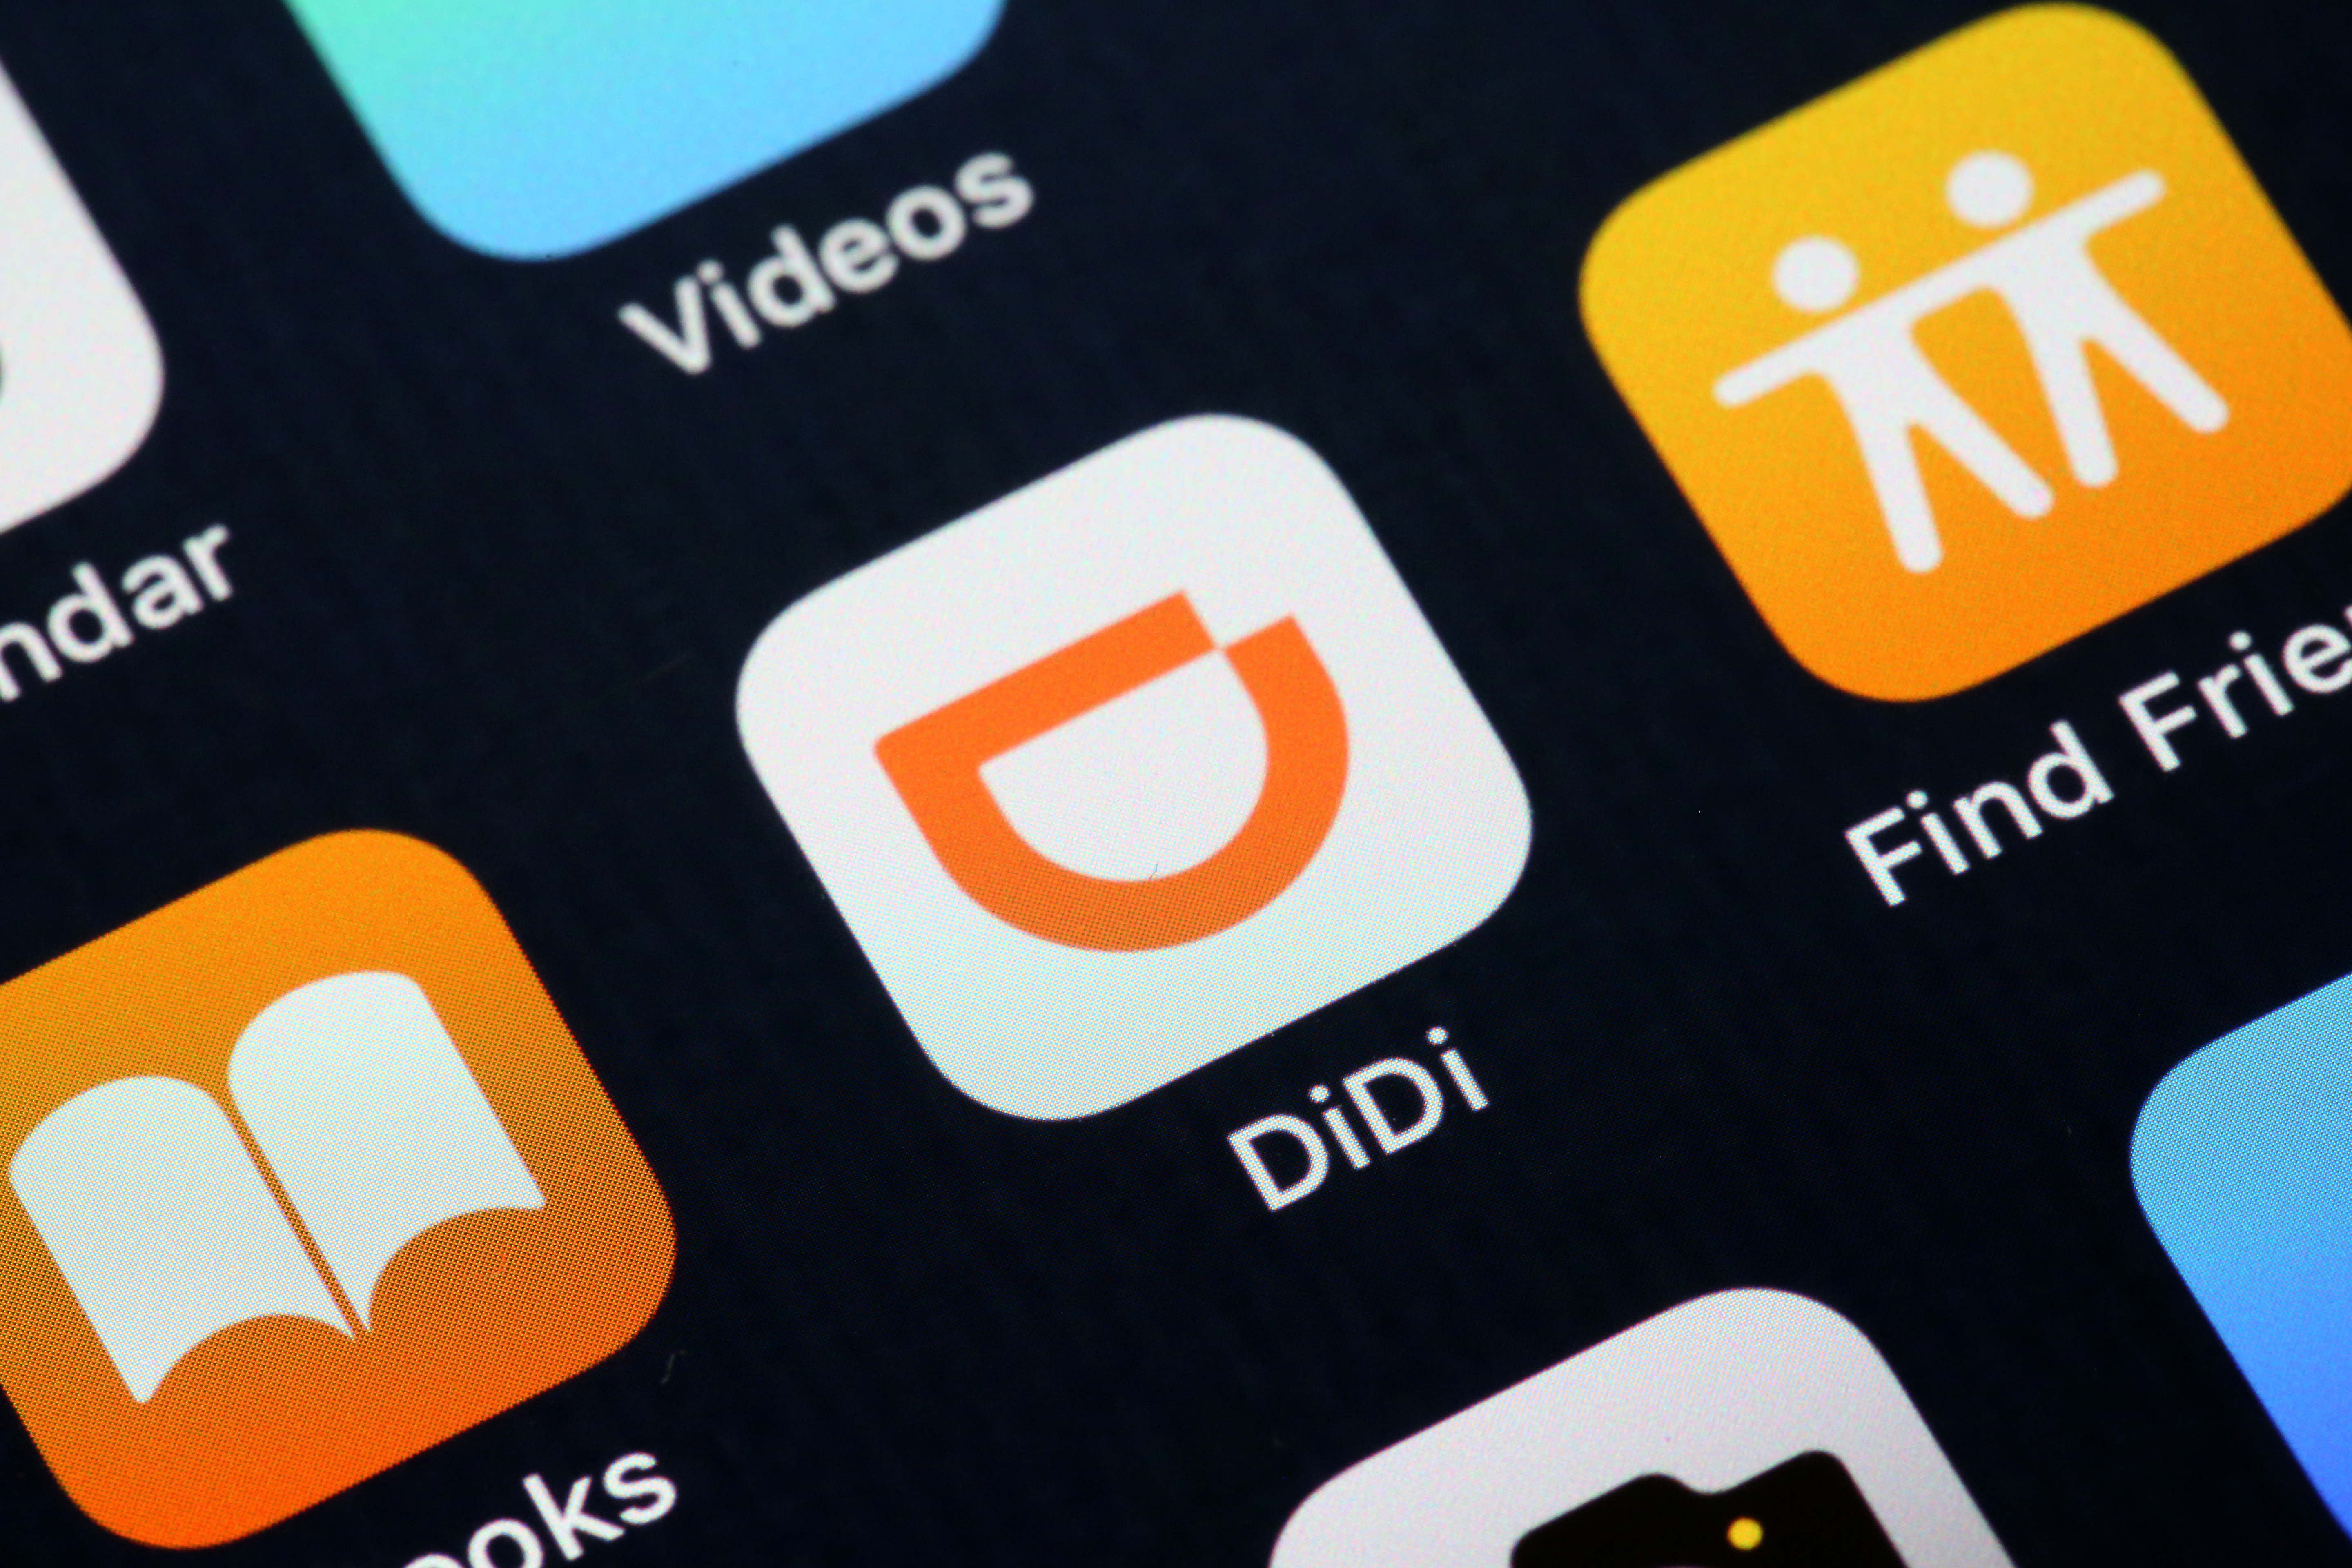 Deals | News Flash: Didi Scores $4 Billion Investment to Beef up AI, Global Market Expansion and EVs